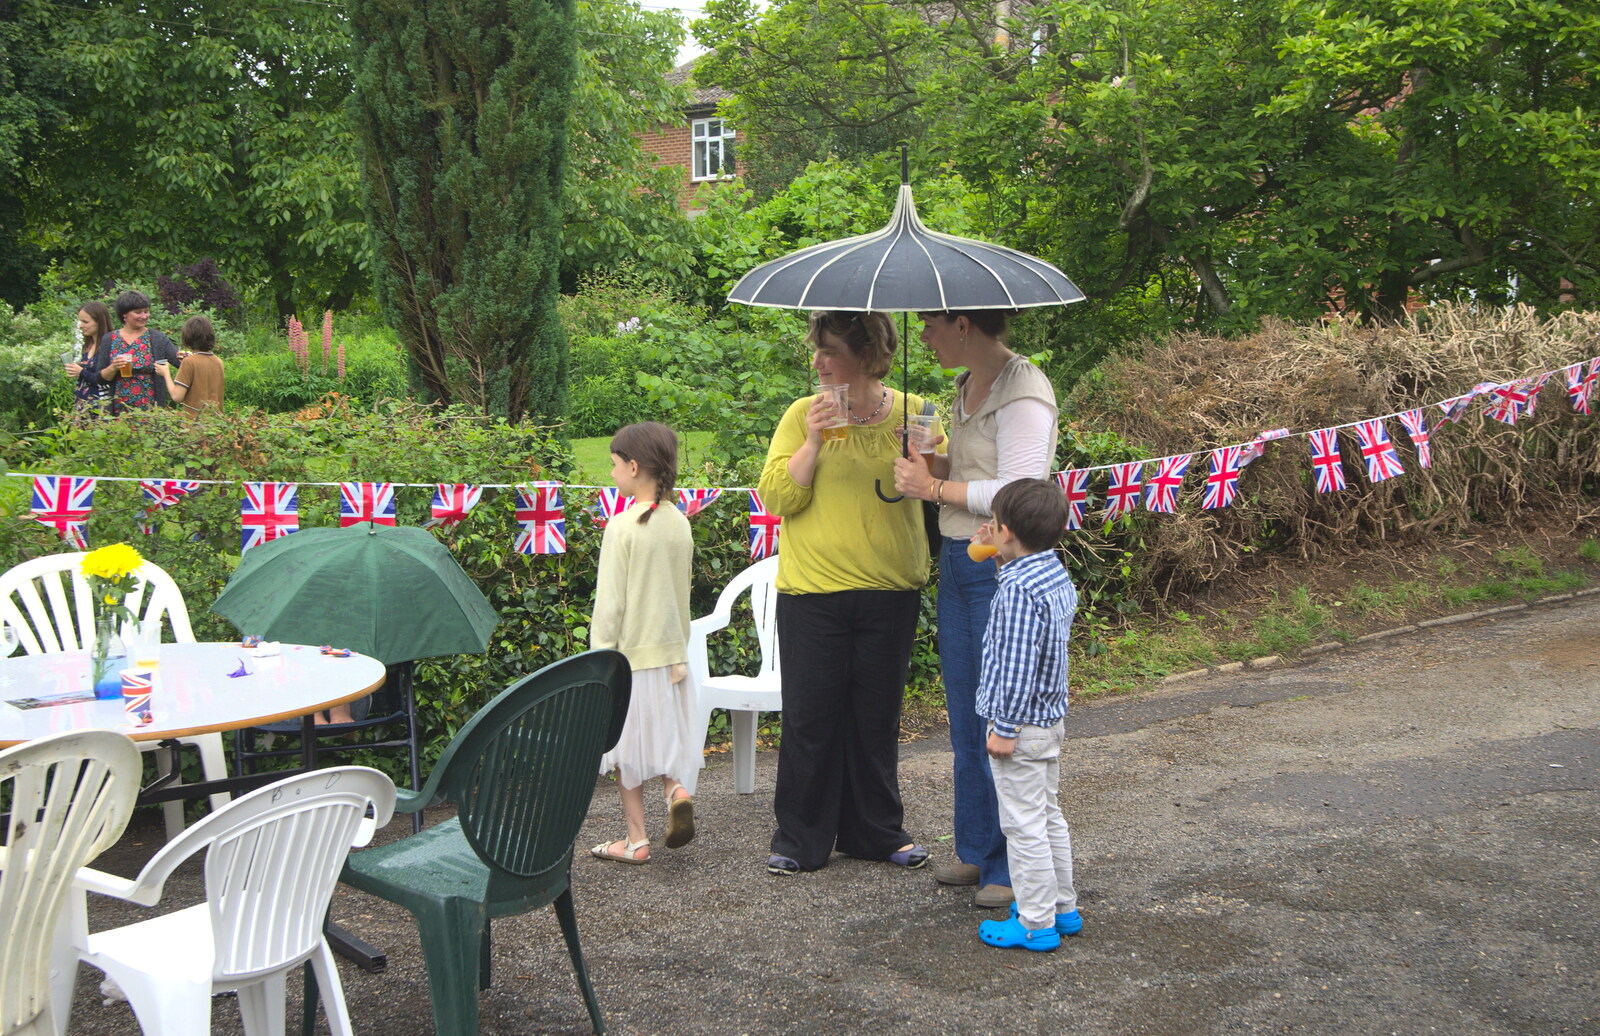 Outside, hardier guests shelter under an umbrella from The Queen's Village Hall Birthday, Brome, Suffolk - 12th June 2016